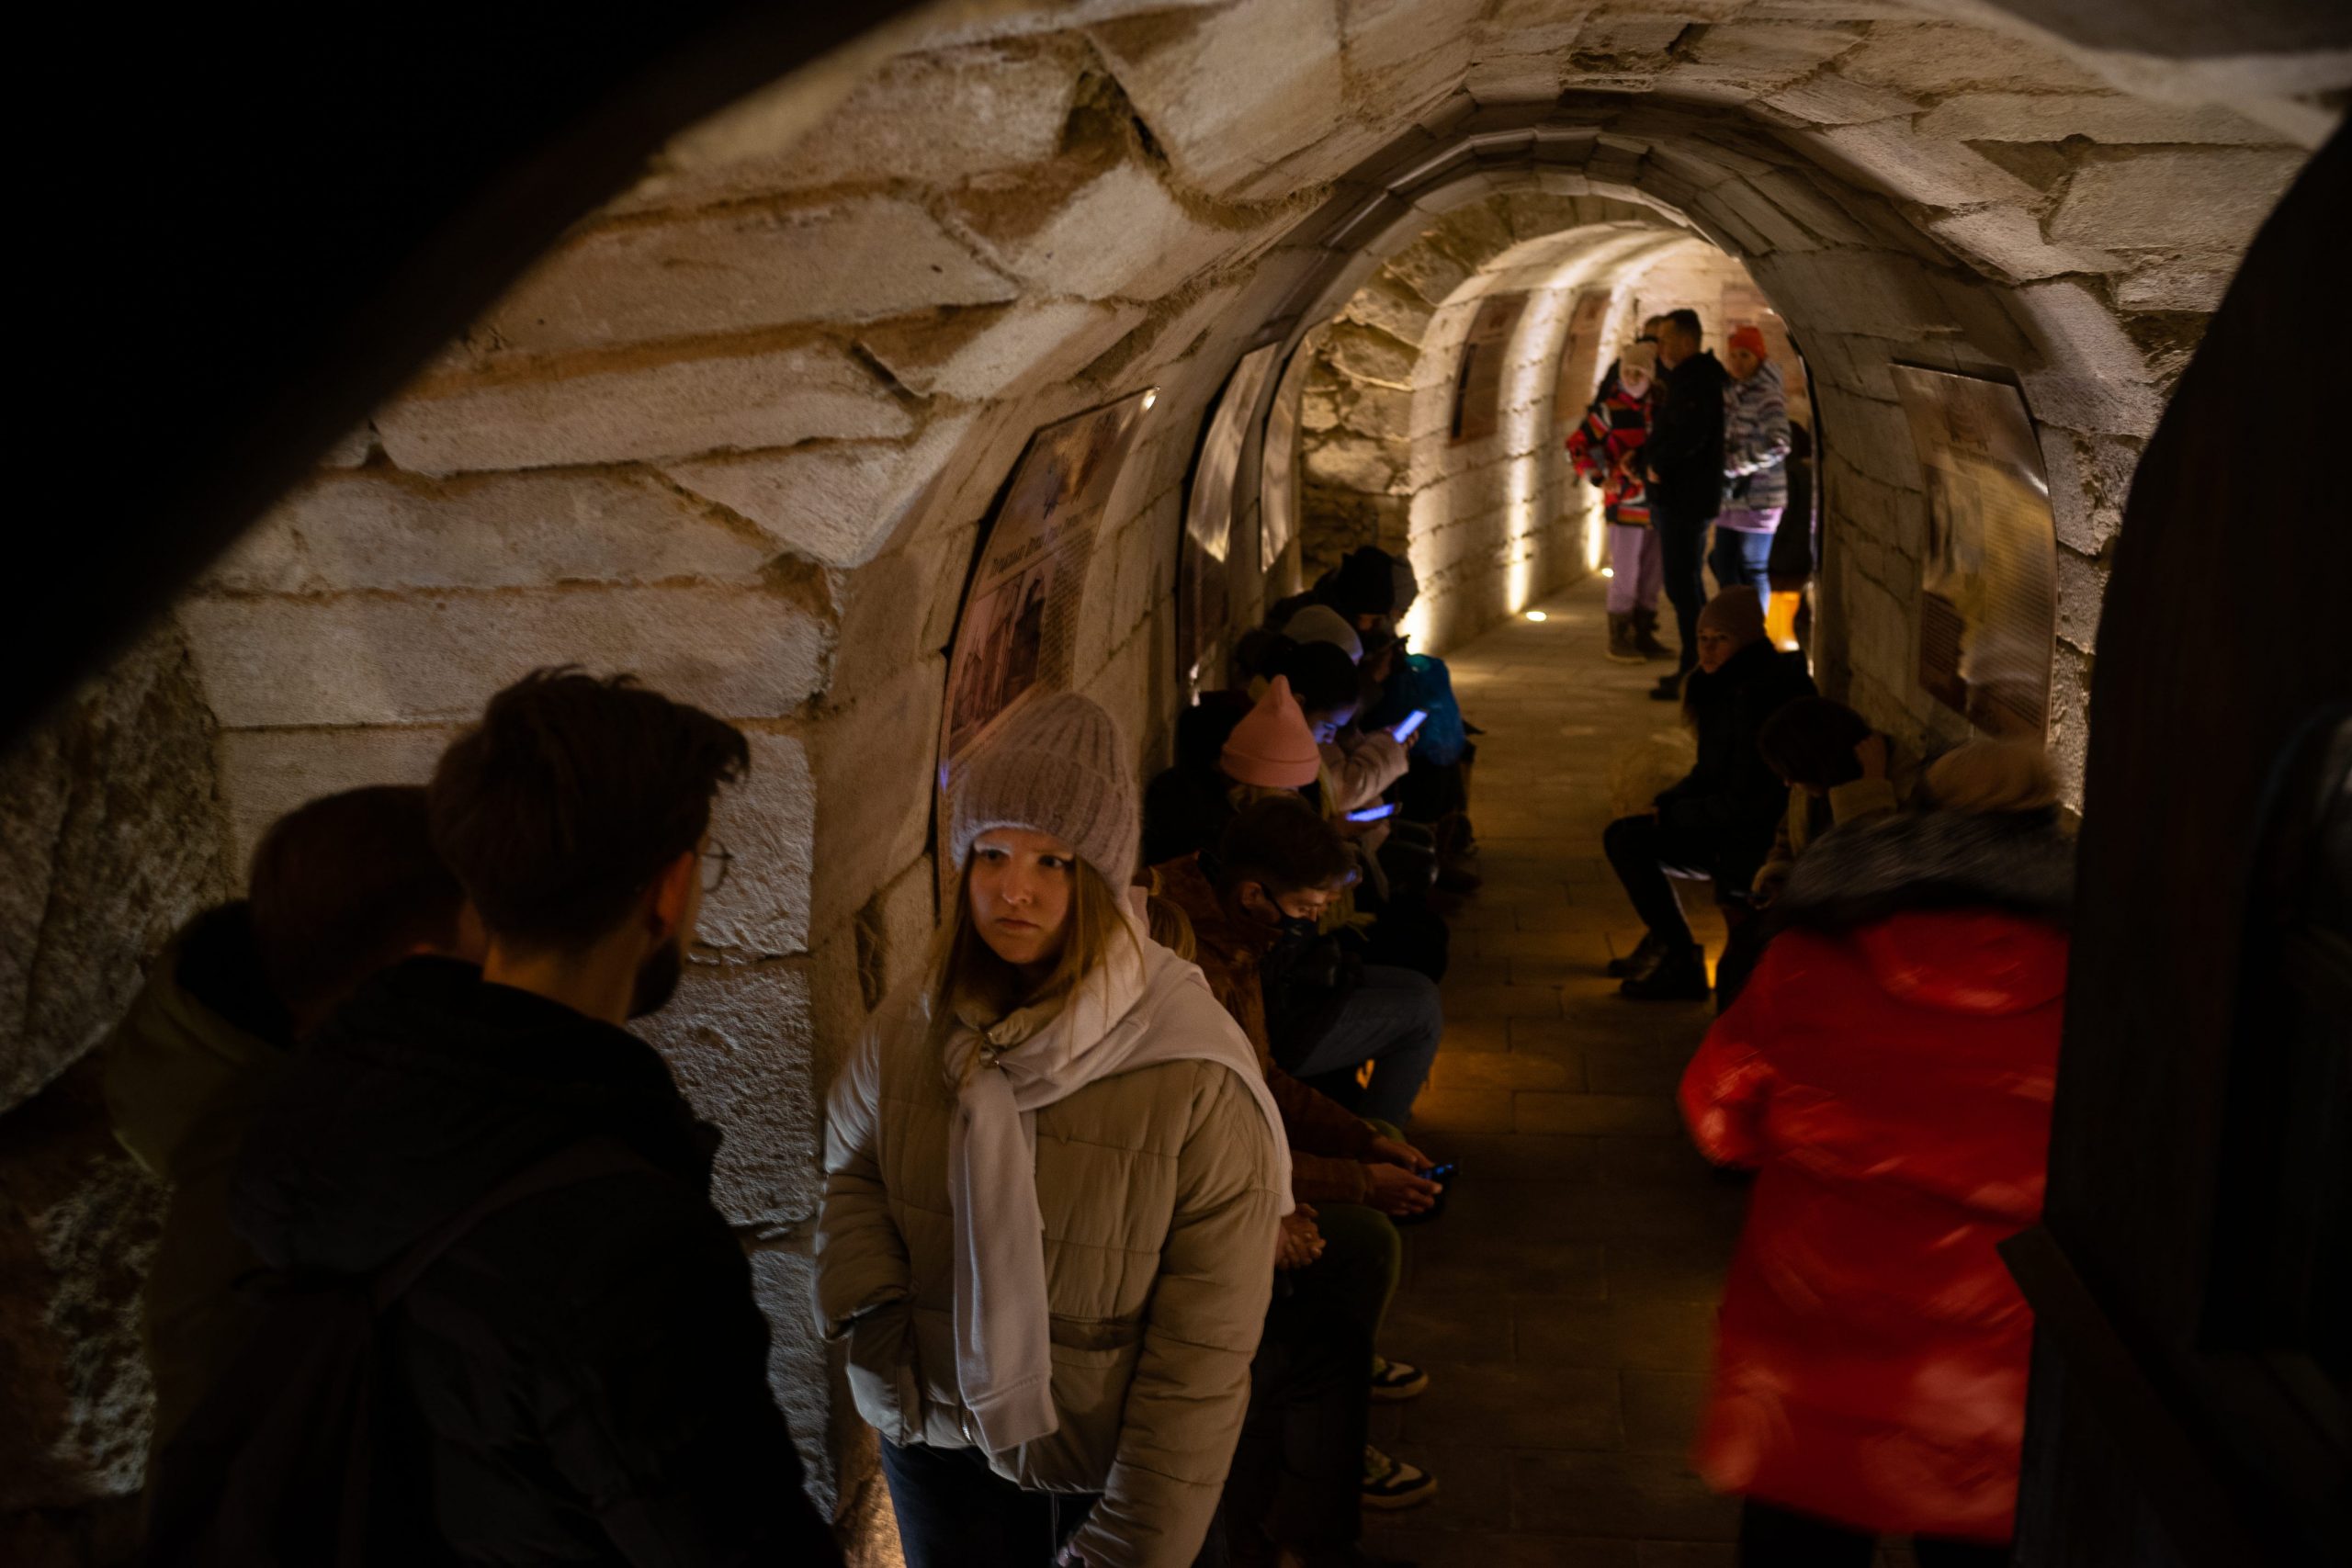 Visitors insider of the air raid shelter in the Cathedral of the Conception of the Blessed Virgin Mary